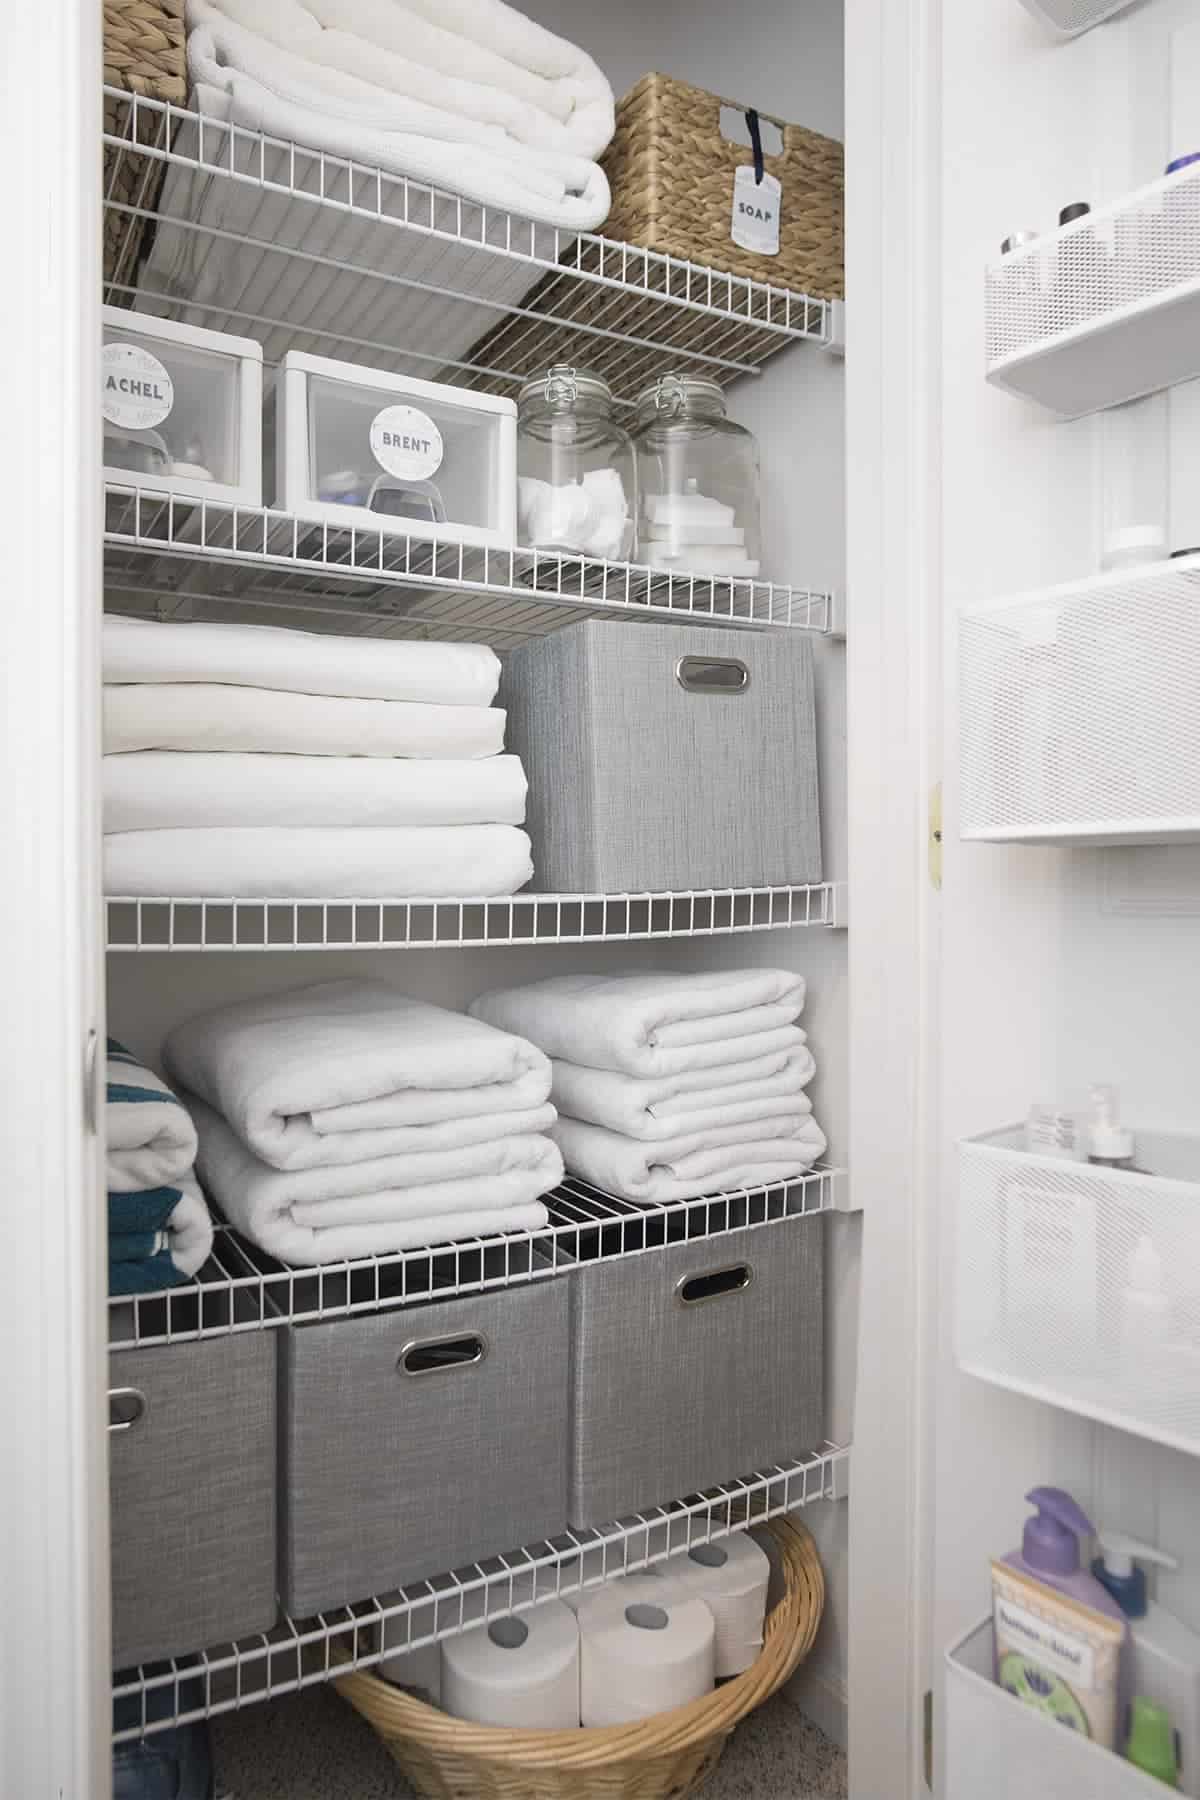 Small Linen Closet Organization with storage bins for easy access. The bins hide the clutter!